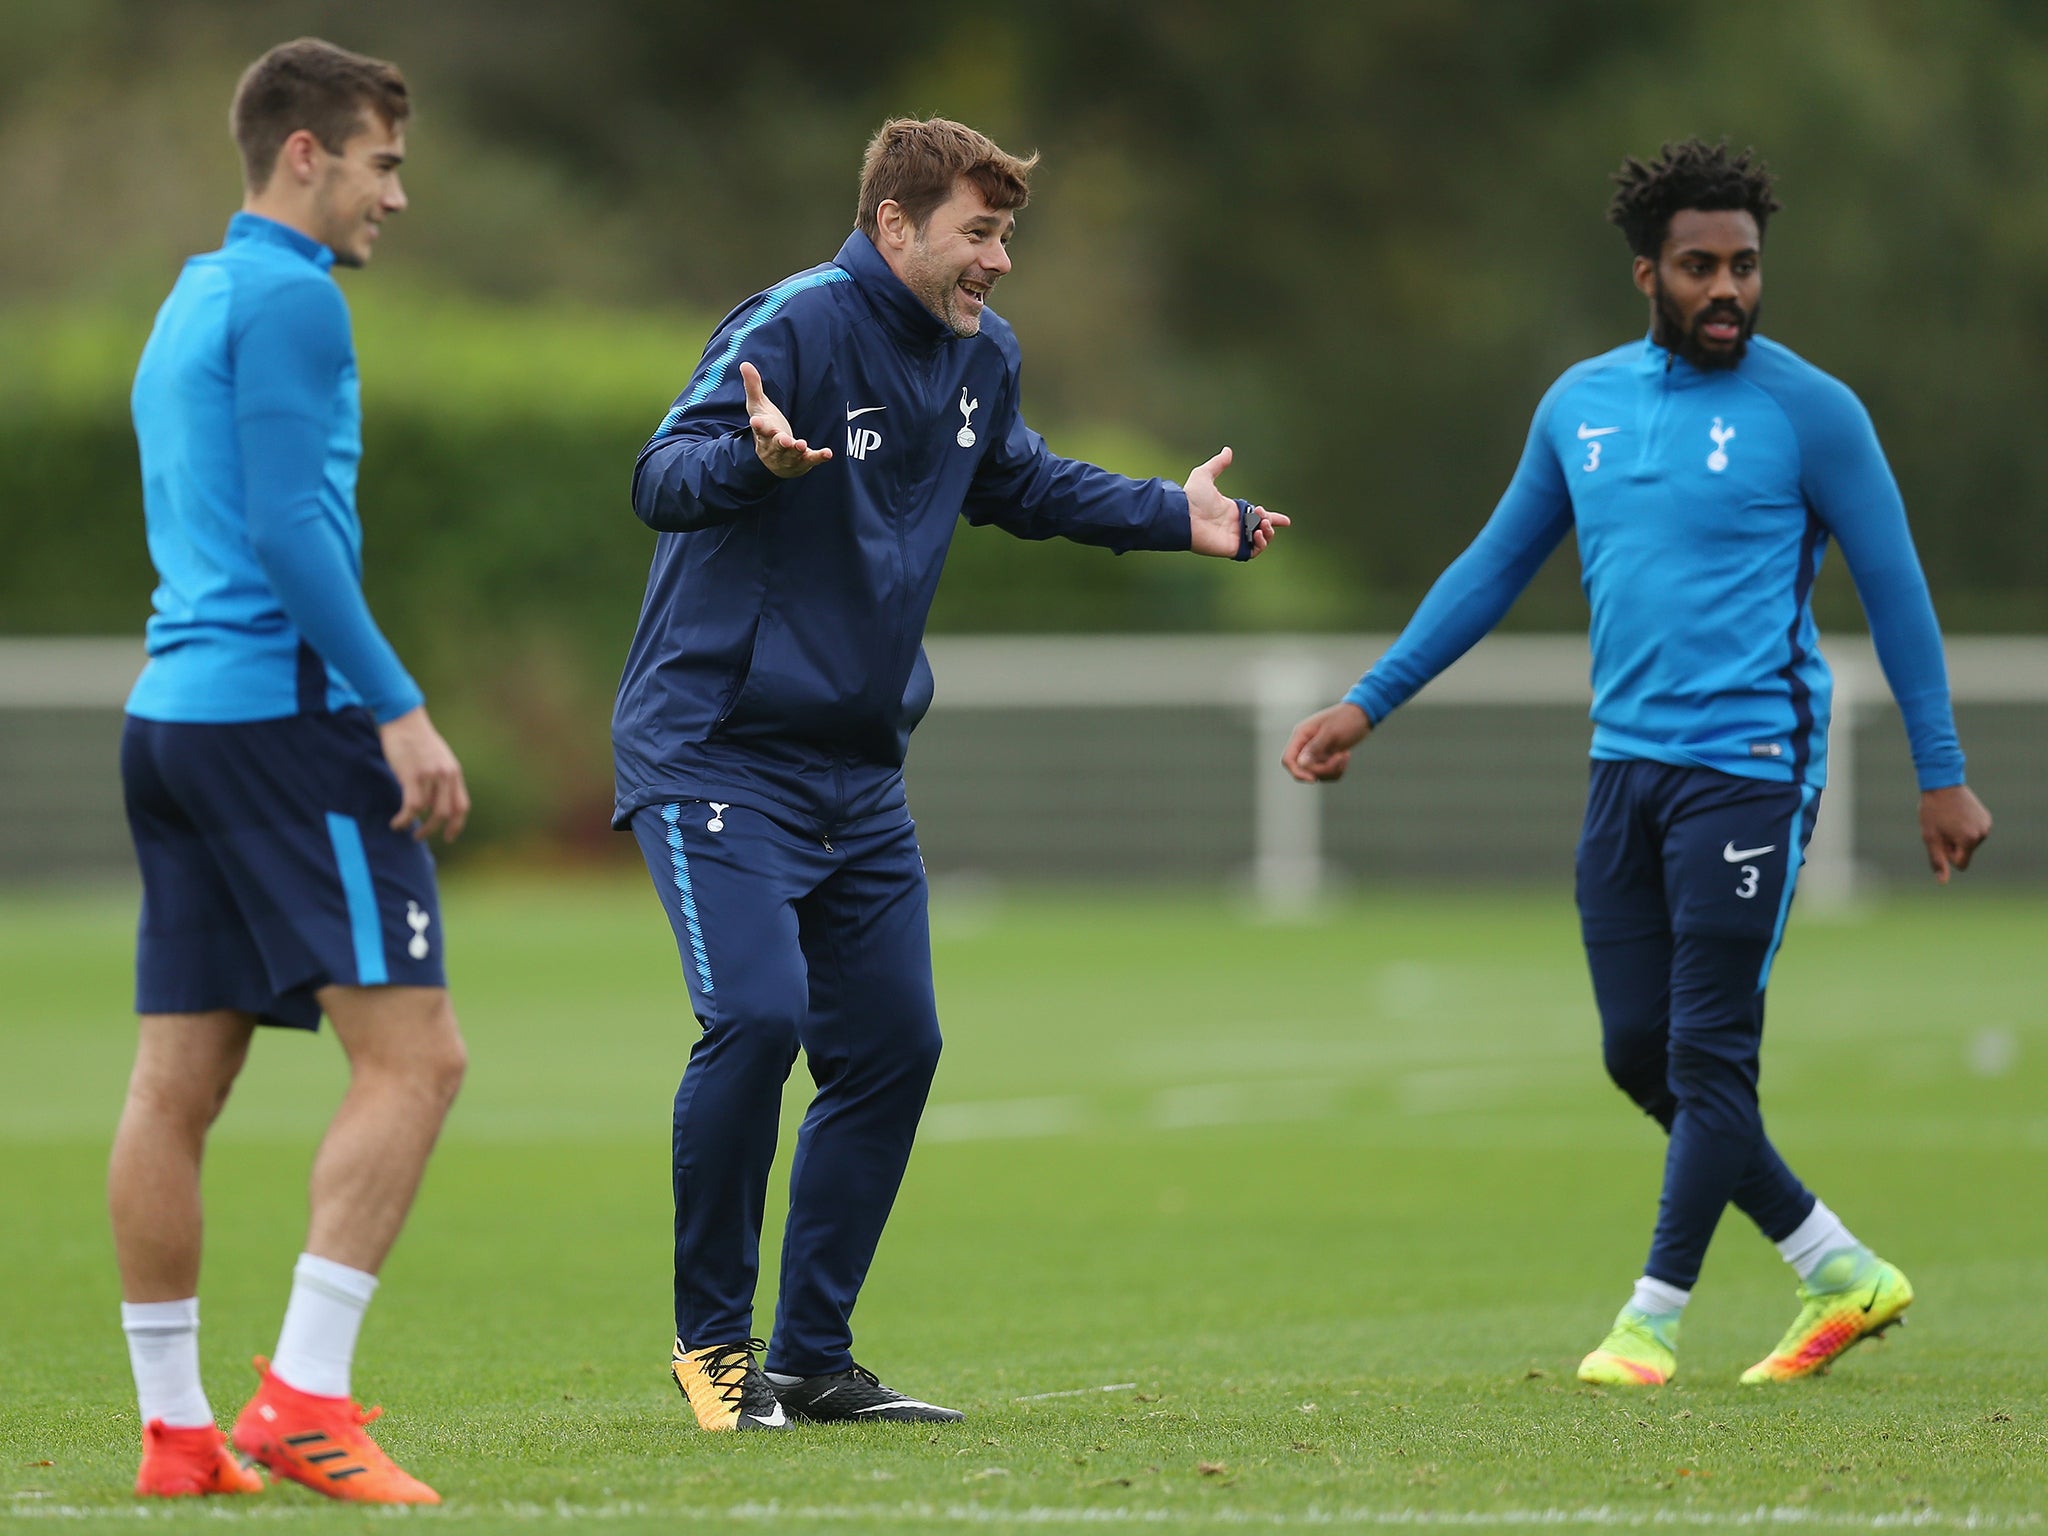 Rose has fallen out of favour under Mauricio Pochettino at Tottenham